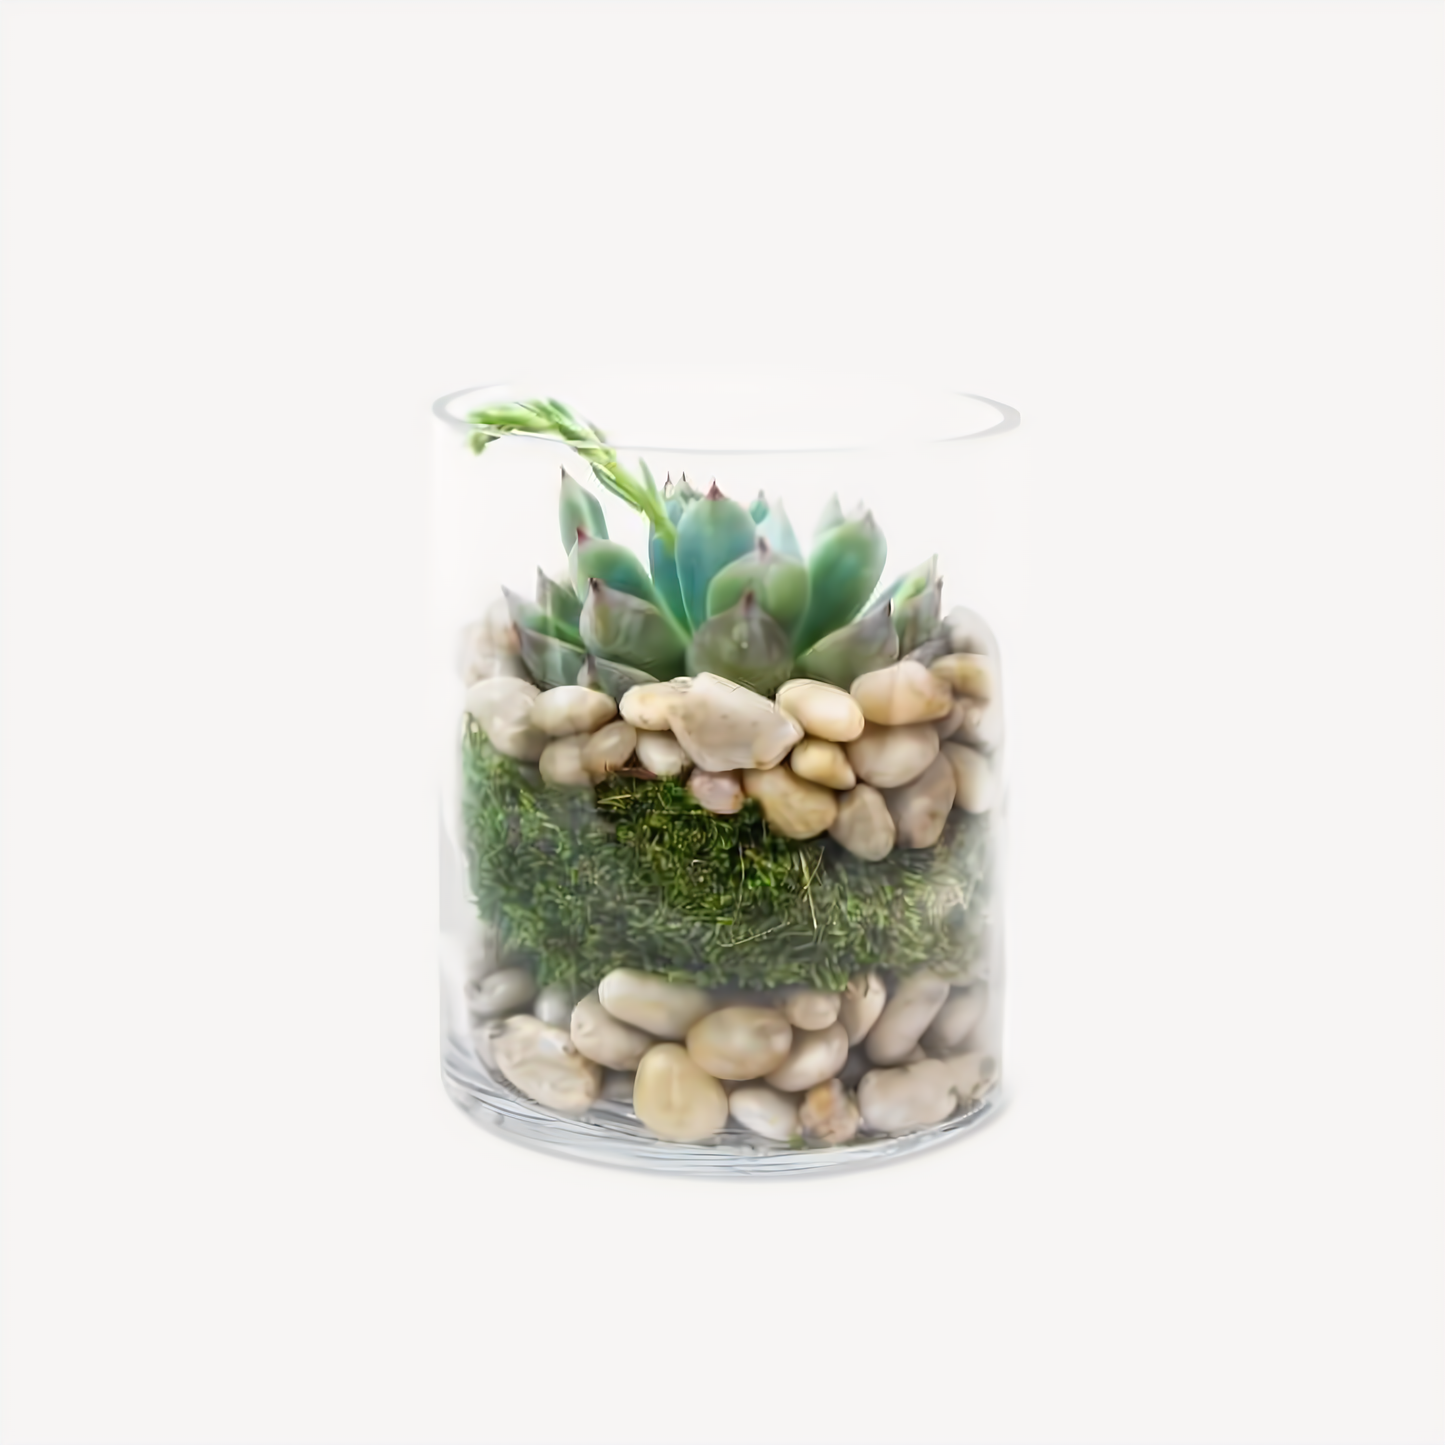 NYC Flower Delivery - ECHEVERIA SUCCULENT IN CYLINDER VASE - Plants